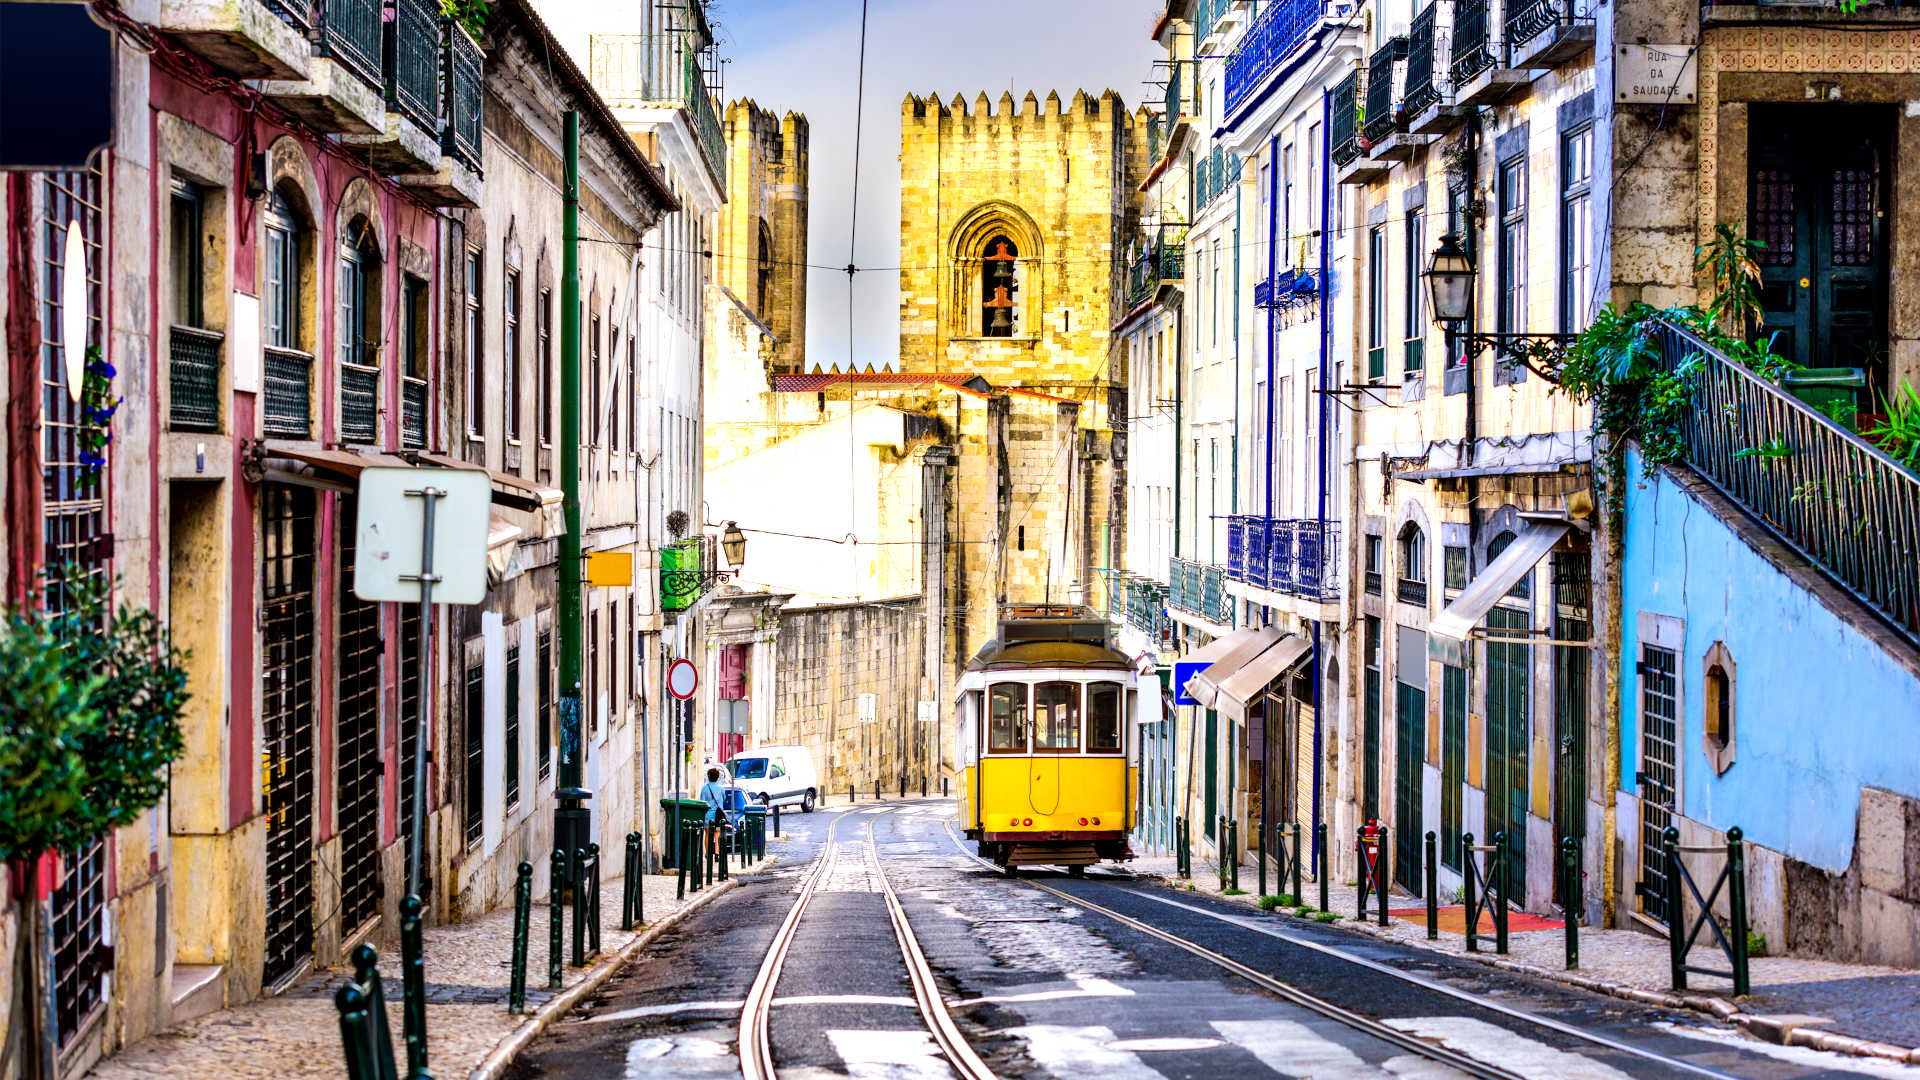 Top 5 things to do in Lisbon - Coolguide4you